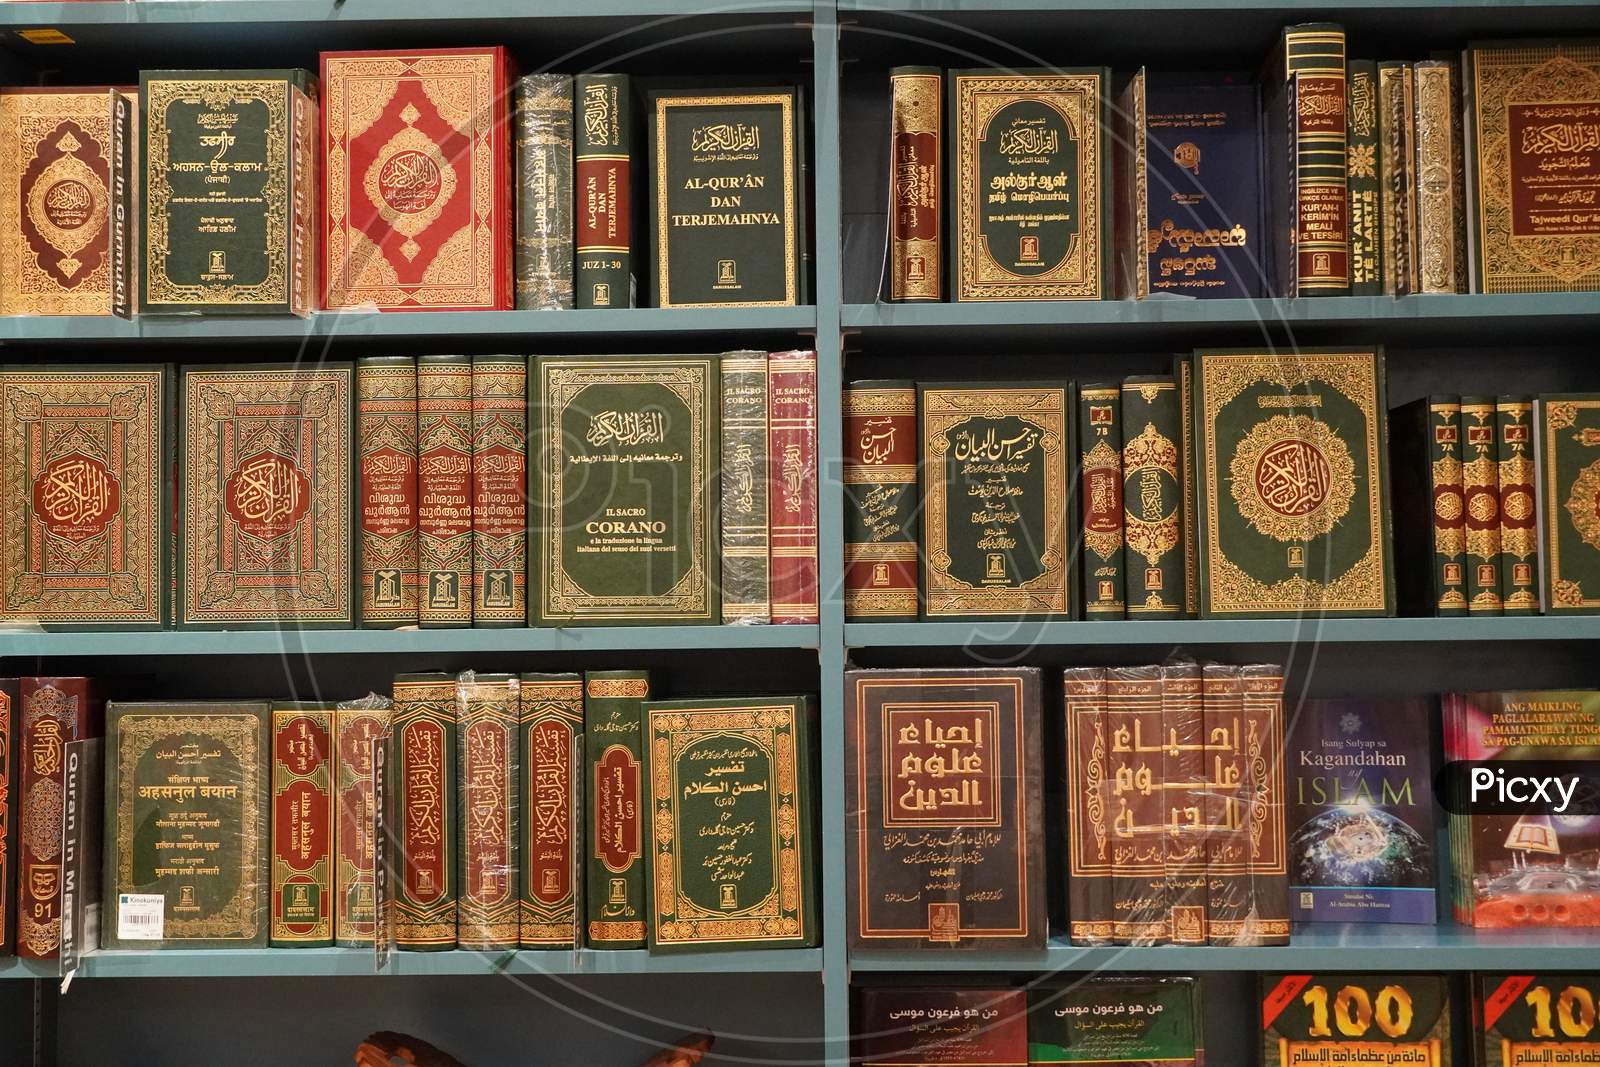 Stack Of Quran On The Shelf. Quran Religious Book Stacked In Shelf For Sale. Available In Various Languages In A Book Store. Islamic Books For Sale, Arabic Religion. Dubai Uae 7 December 2019